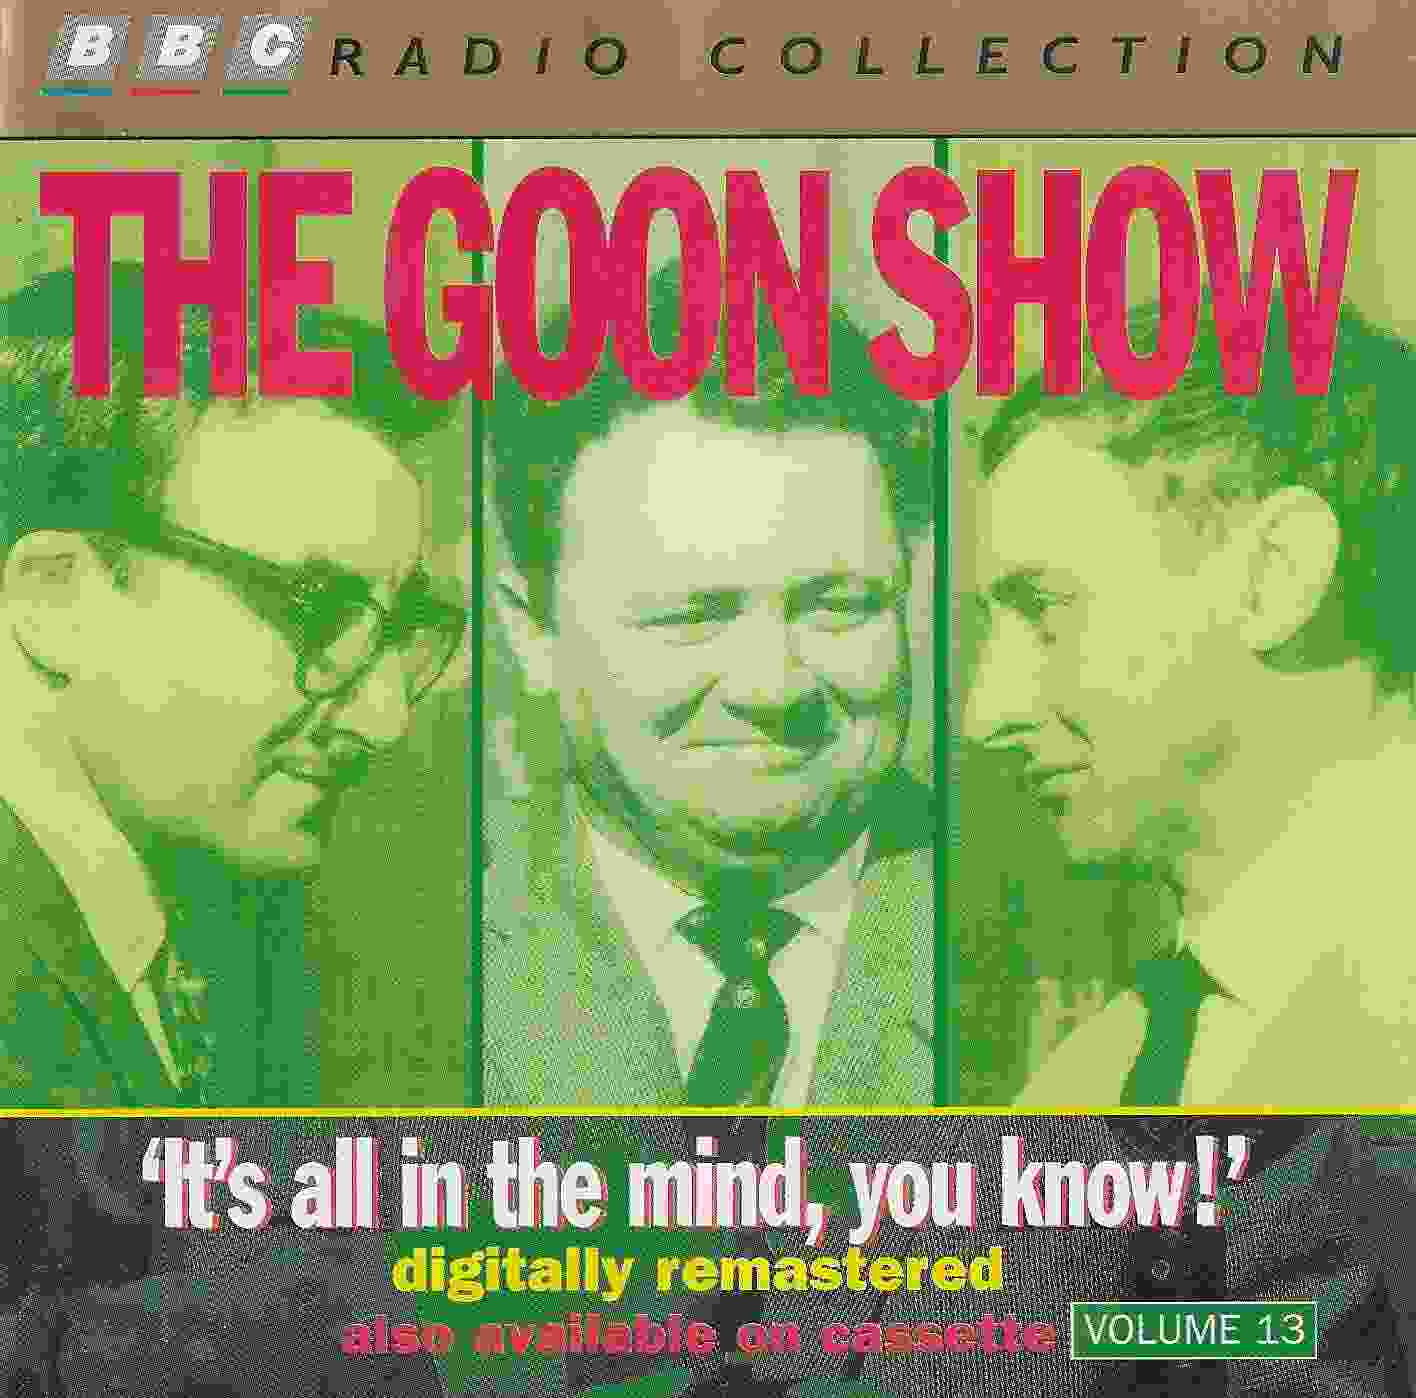 Picture of ZBBC 1892 CD The Goon show 13 - It's all in the mind, you know! by artist Spike Milligan / Larry Stephens from the BBC cds - Records and Tapes library